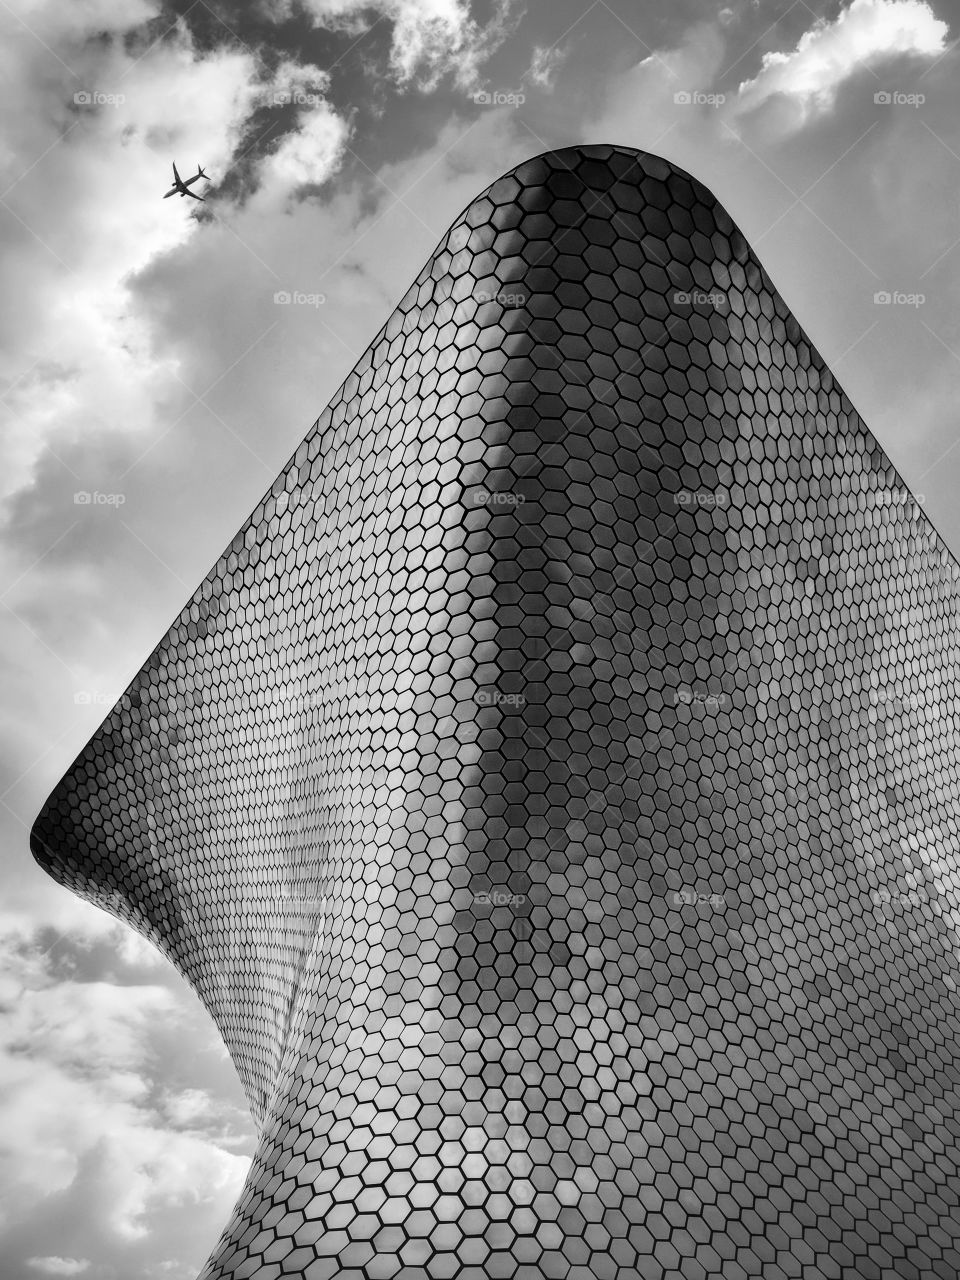 The dazzling Soumaya art museum in the heart of Mexico City